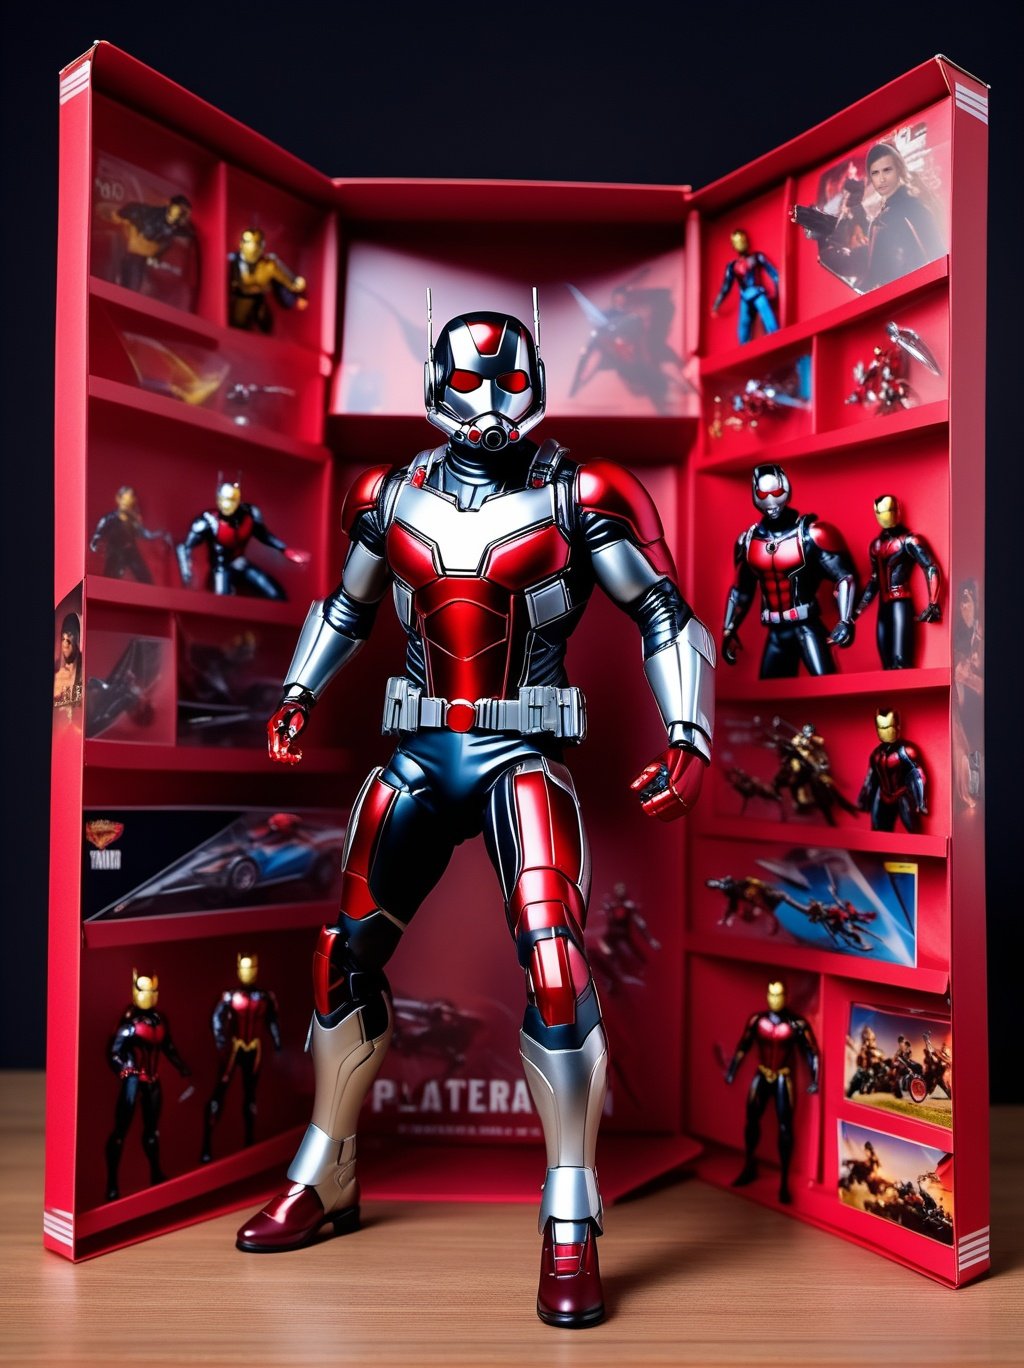 (8k, ultra quality, masterpiece:1.5), (Dutch angle:1.3), ActionFigureQuiron style,action figure box, solo, ant-man,  focus,  bodysuit, superhero,box,horse, horseback riding,action figure, toy, doll, character print, (best quality:1.15), (detailed:1.15), (realistic:1.2), (intricate:1.4),  cover page, card, in a gift box, no humans,  gift box, playset, in a box, full body, toy playset pack, in a gift box, premium playset toy box,<lyco:SDXL1.0_quiron_ActionFigure_v4.1_lycoris:1.0>